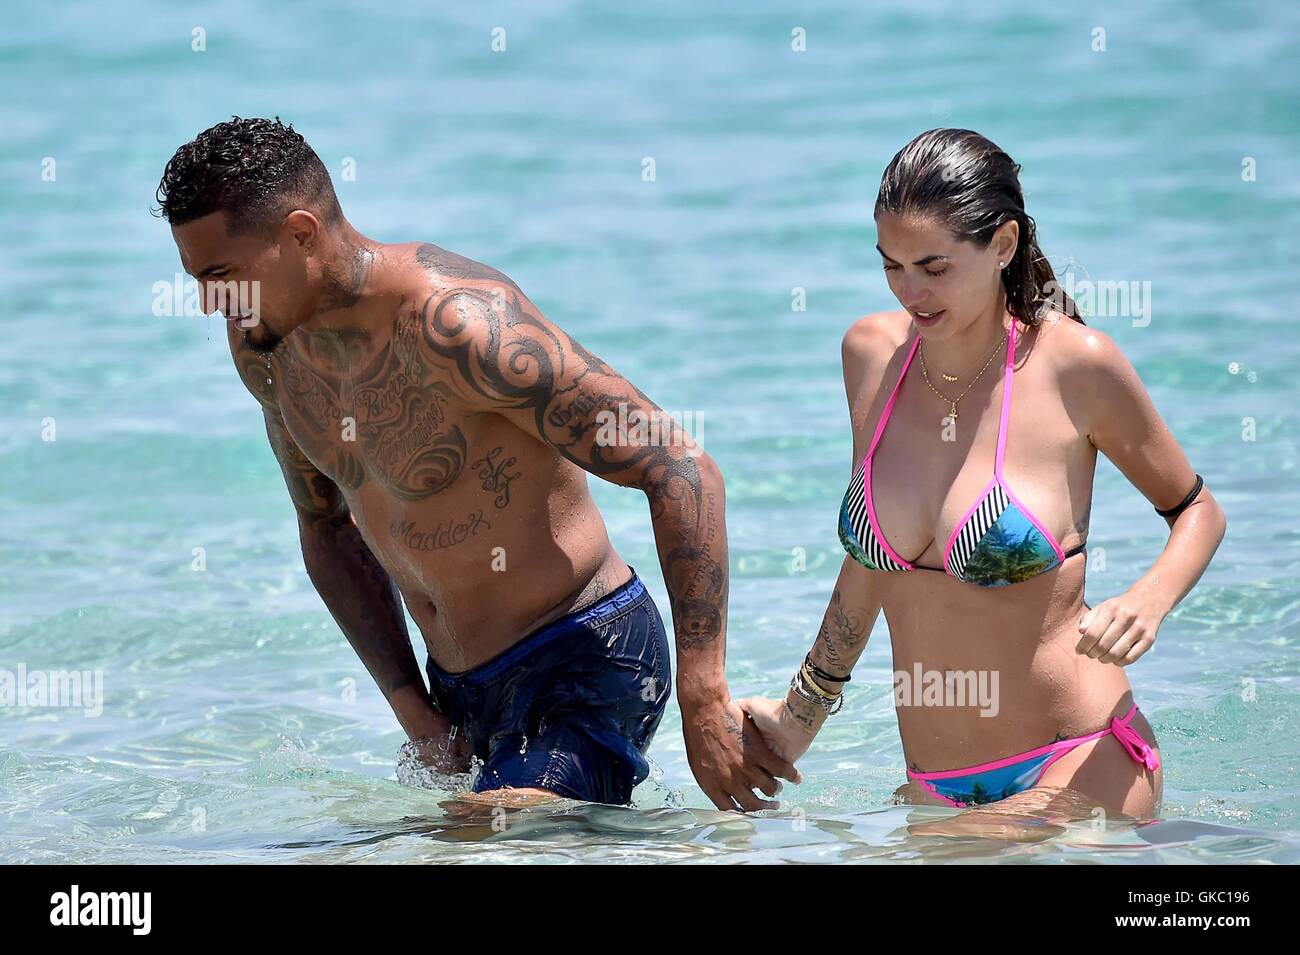 Kevin-Prince Boateng with his wife Melissa Satta and their son Maddox  enjoying a holiday at the white club beach in Sardinia Featuring: Kevin-Prince  Boateng, Melissa Satta, Maddox Prince Boateng Where: Sardinia, Italy